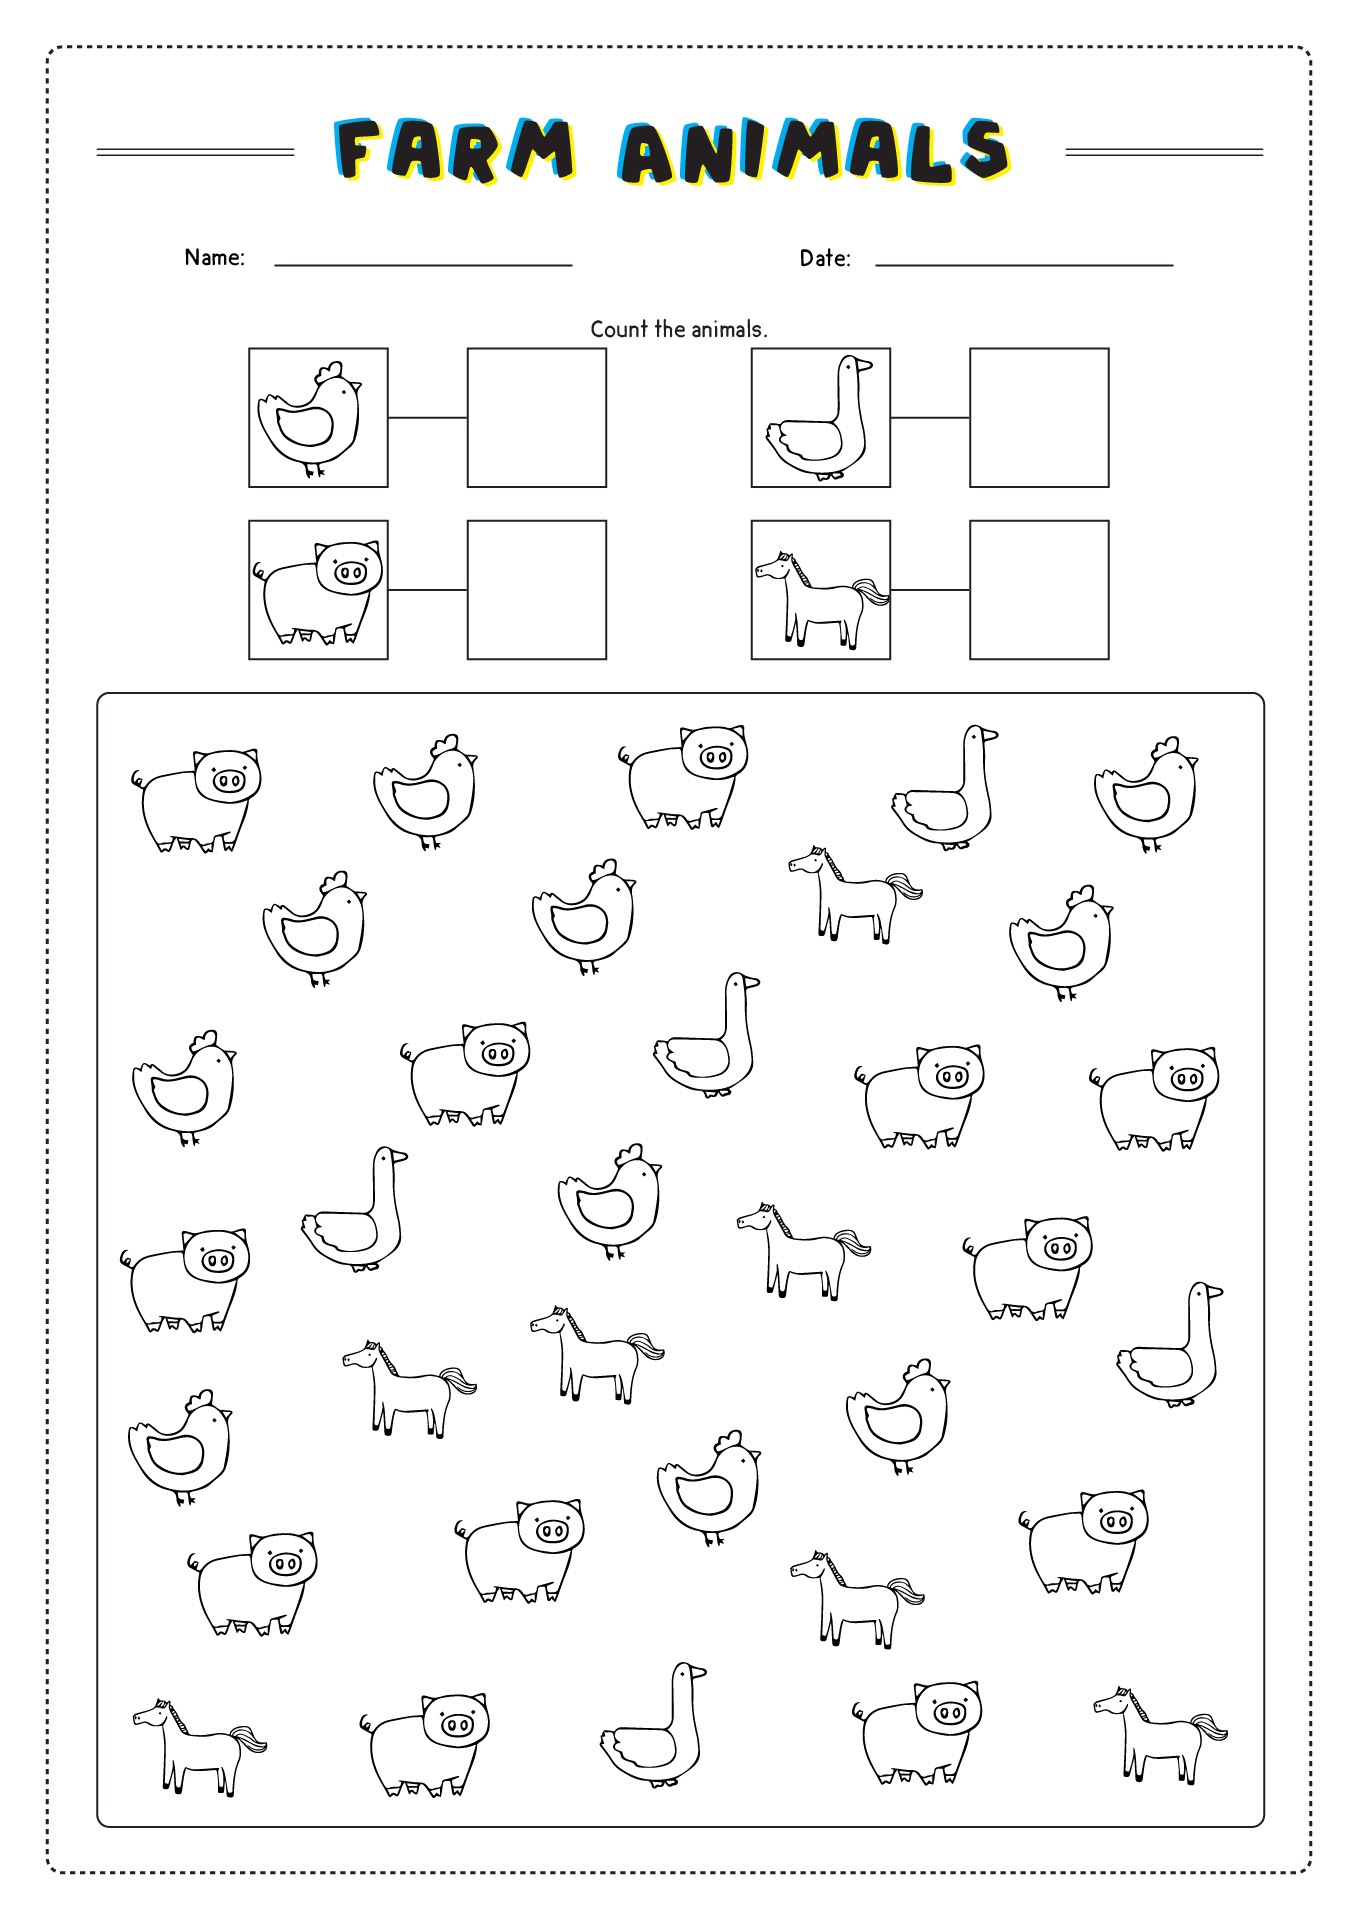 10-best-images-of-farm-animals-worksheets-for-kids-printable-farm-animals-worksheets-printable